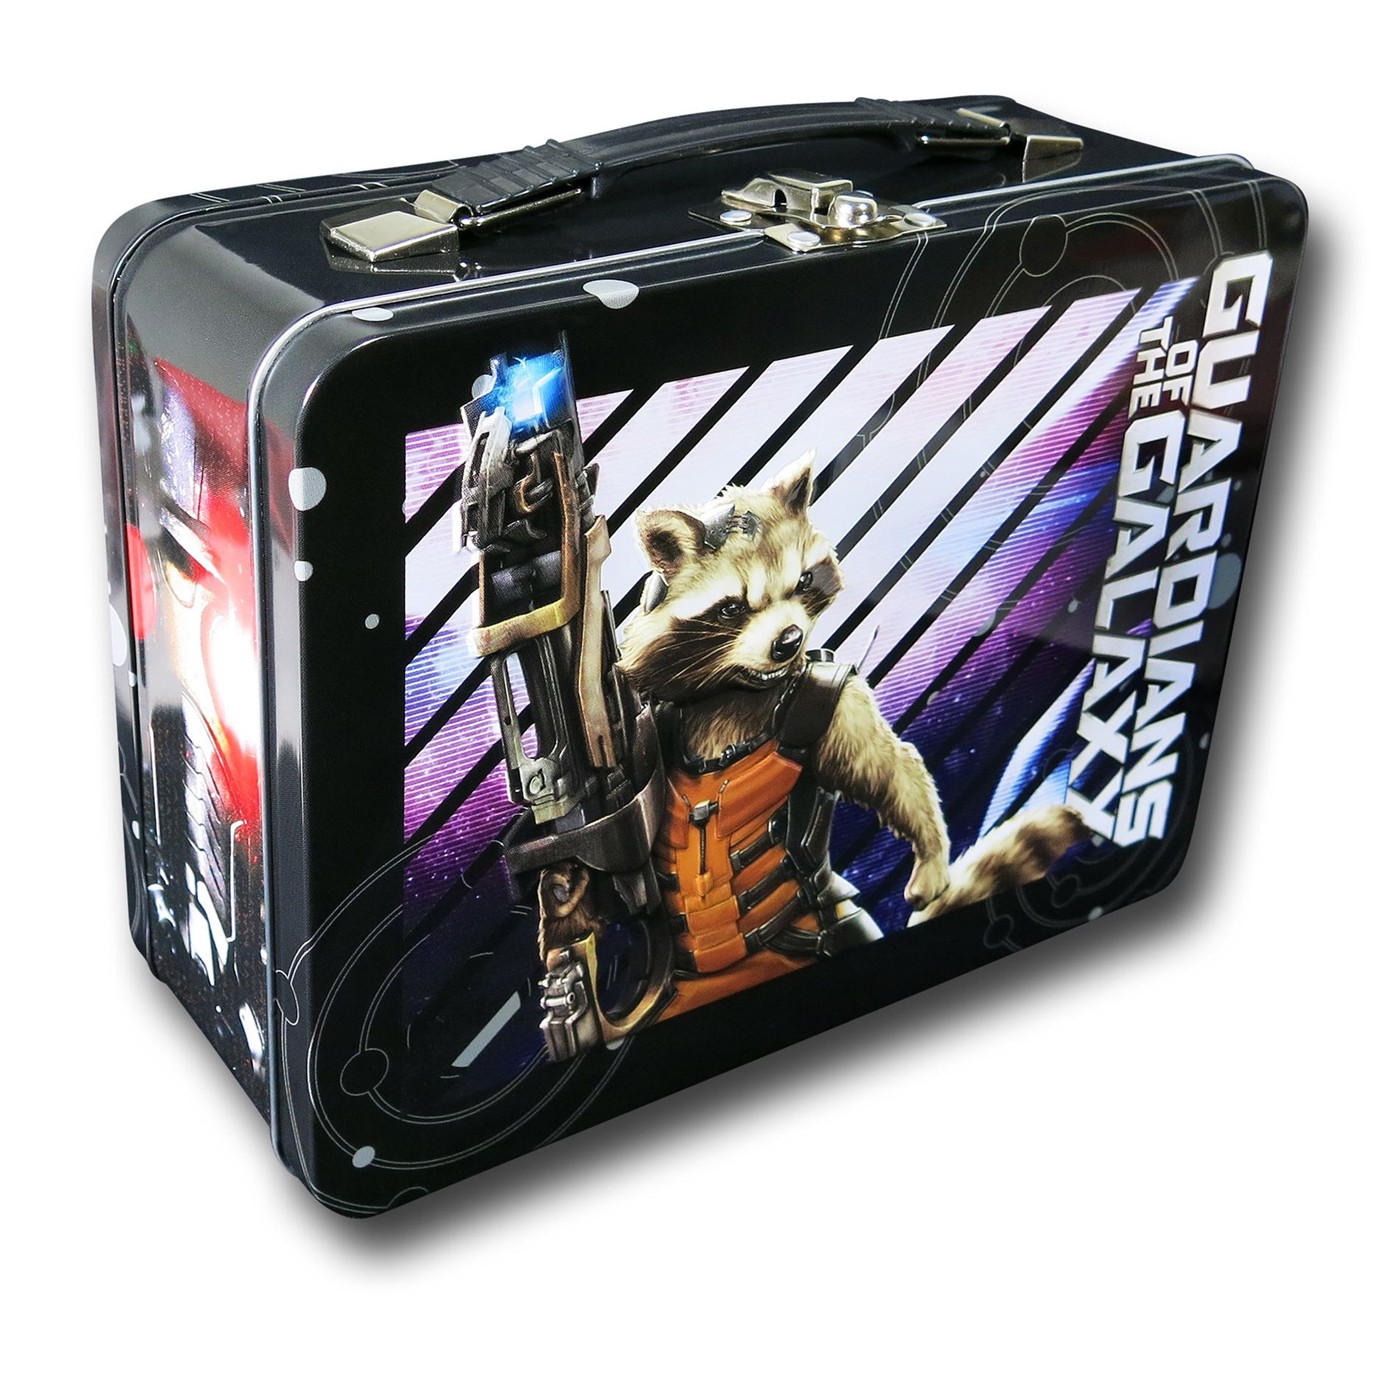 Guardians of the Galaxy Tin Lunch Box